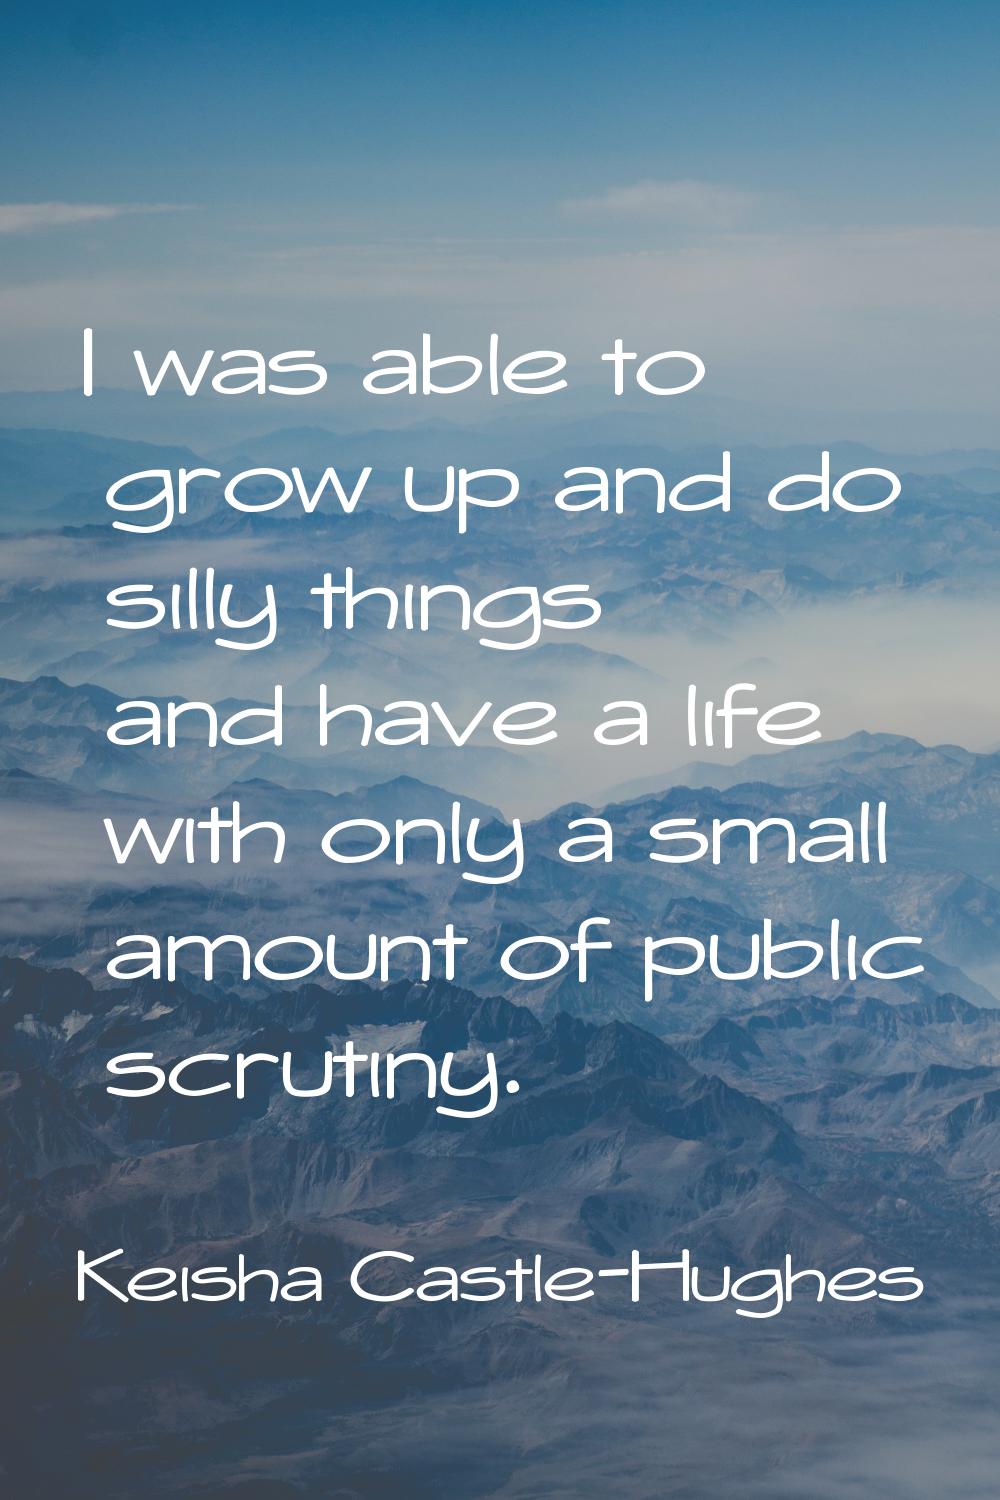 I was able to grow up and do silly things and have a life with only a small amount of public scruti